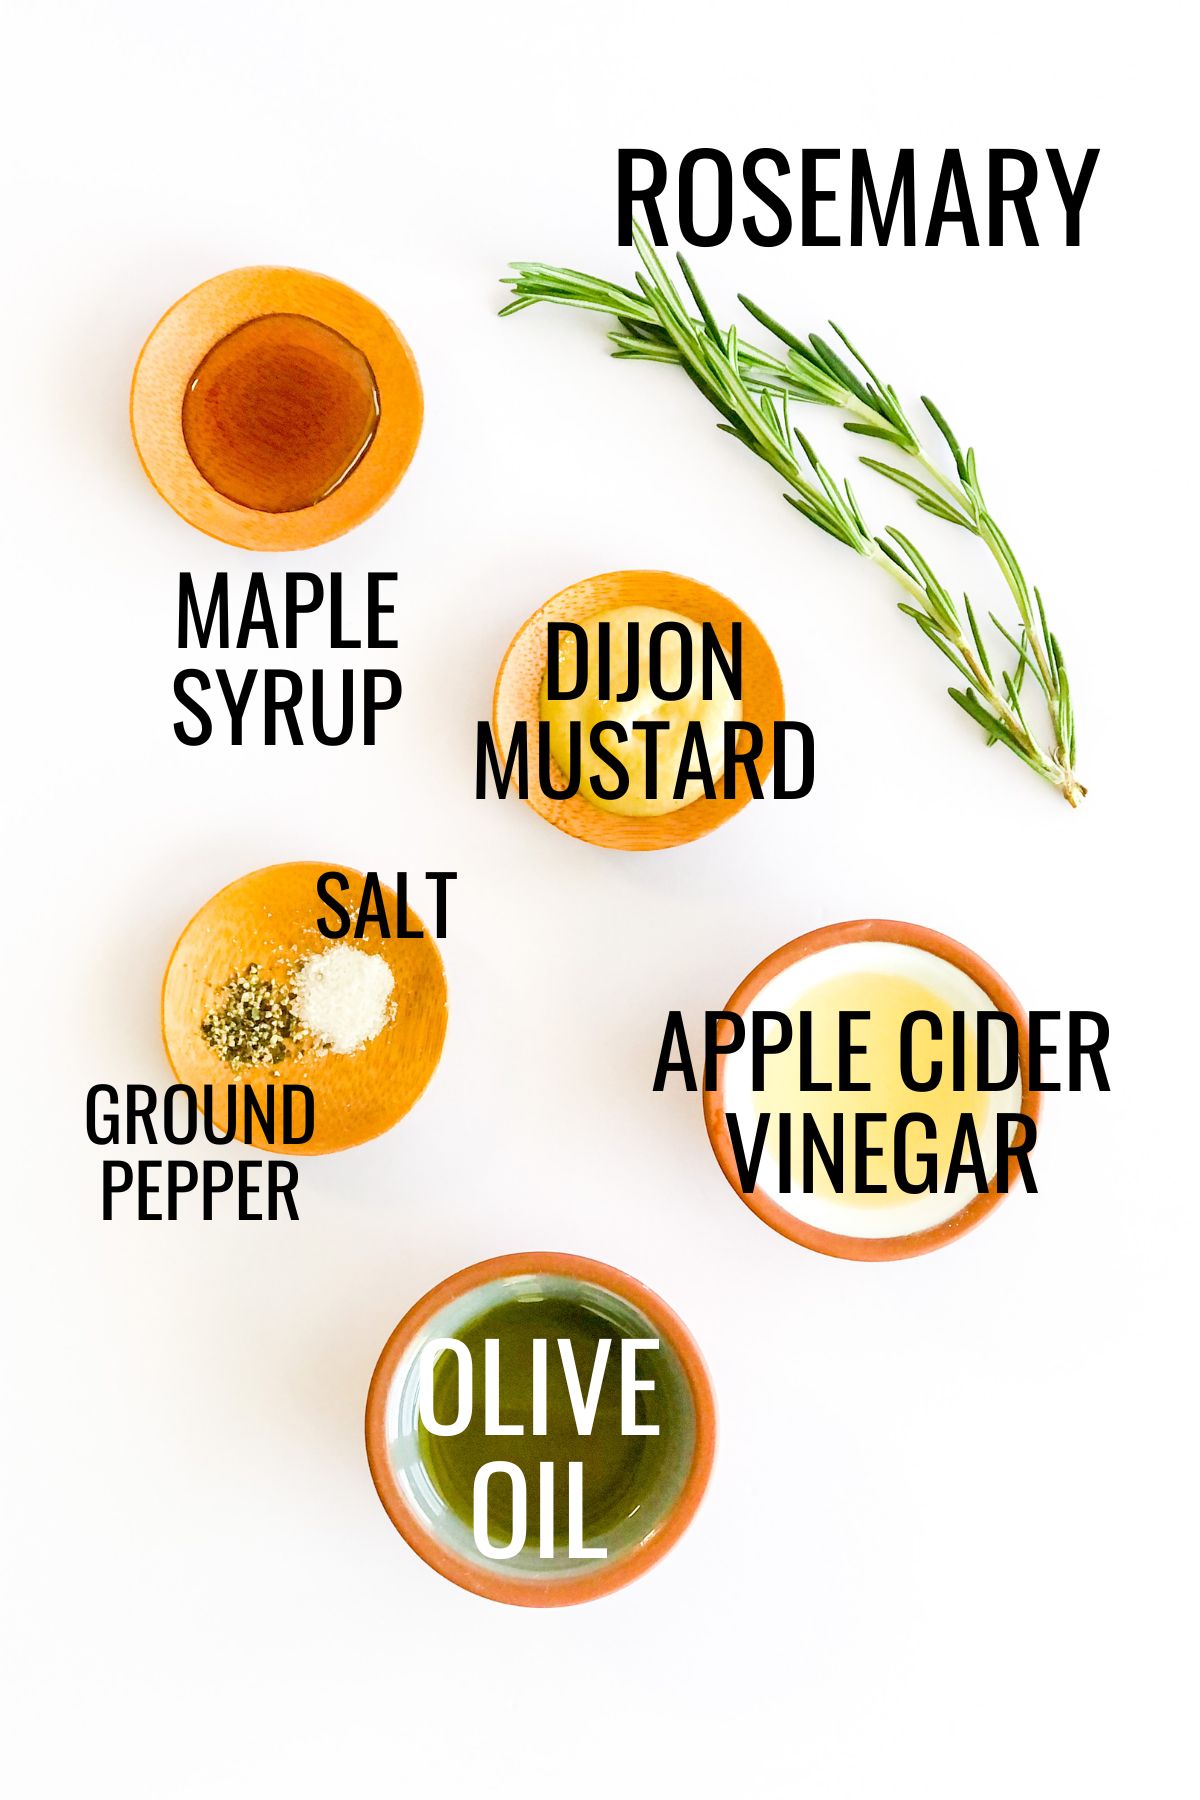 small bowls of maple syrup, dijon mustard, olive oil, and apple cider vinegar next to a sprig of fresh rosemary on a white background